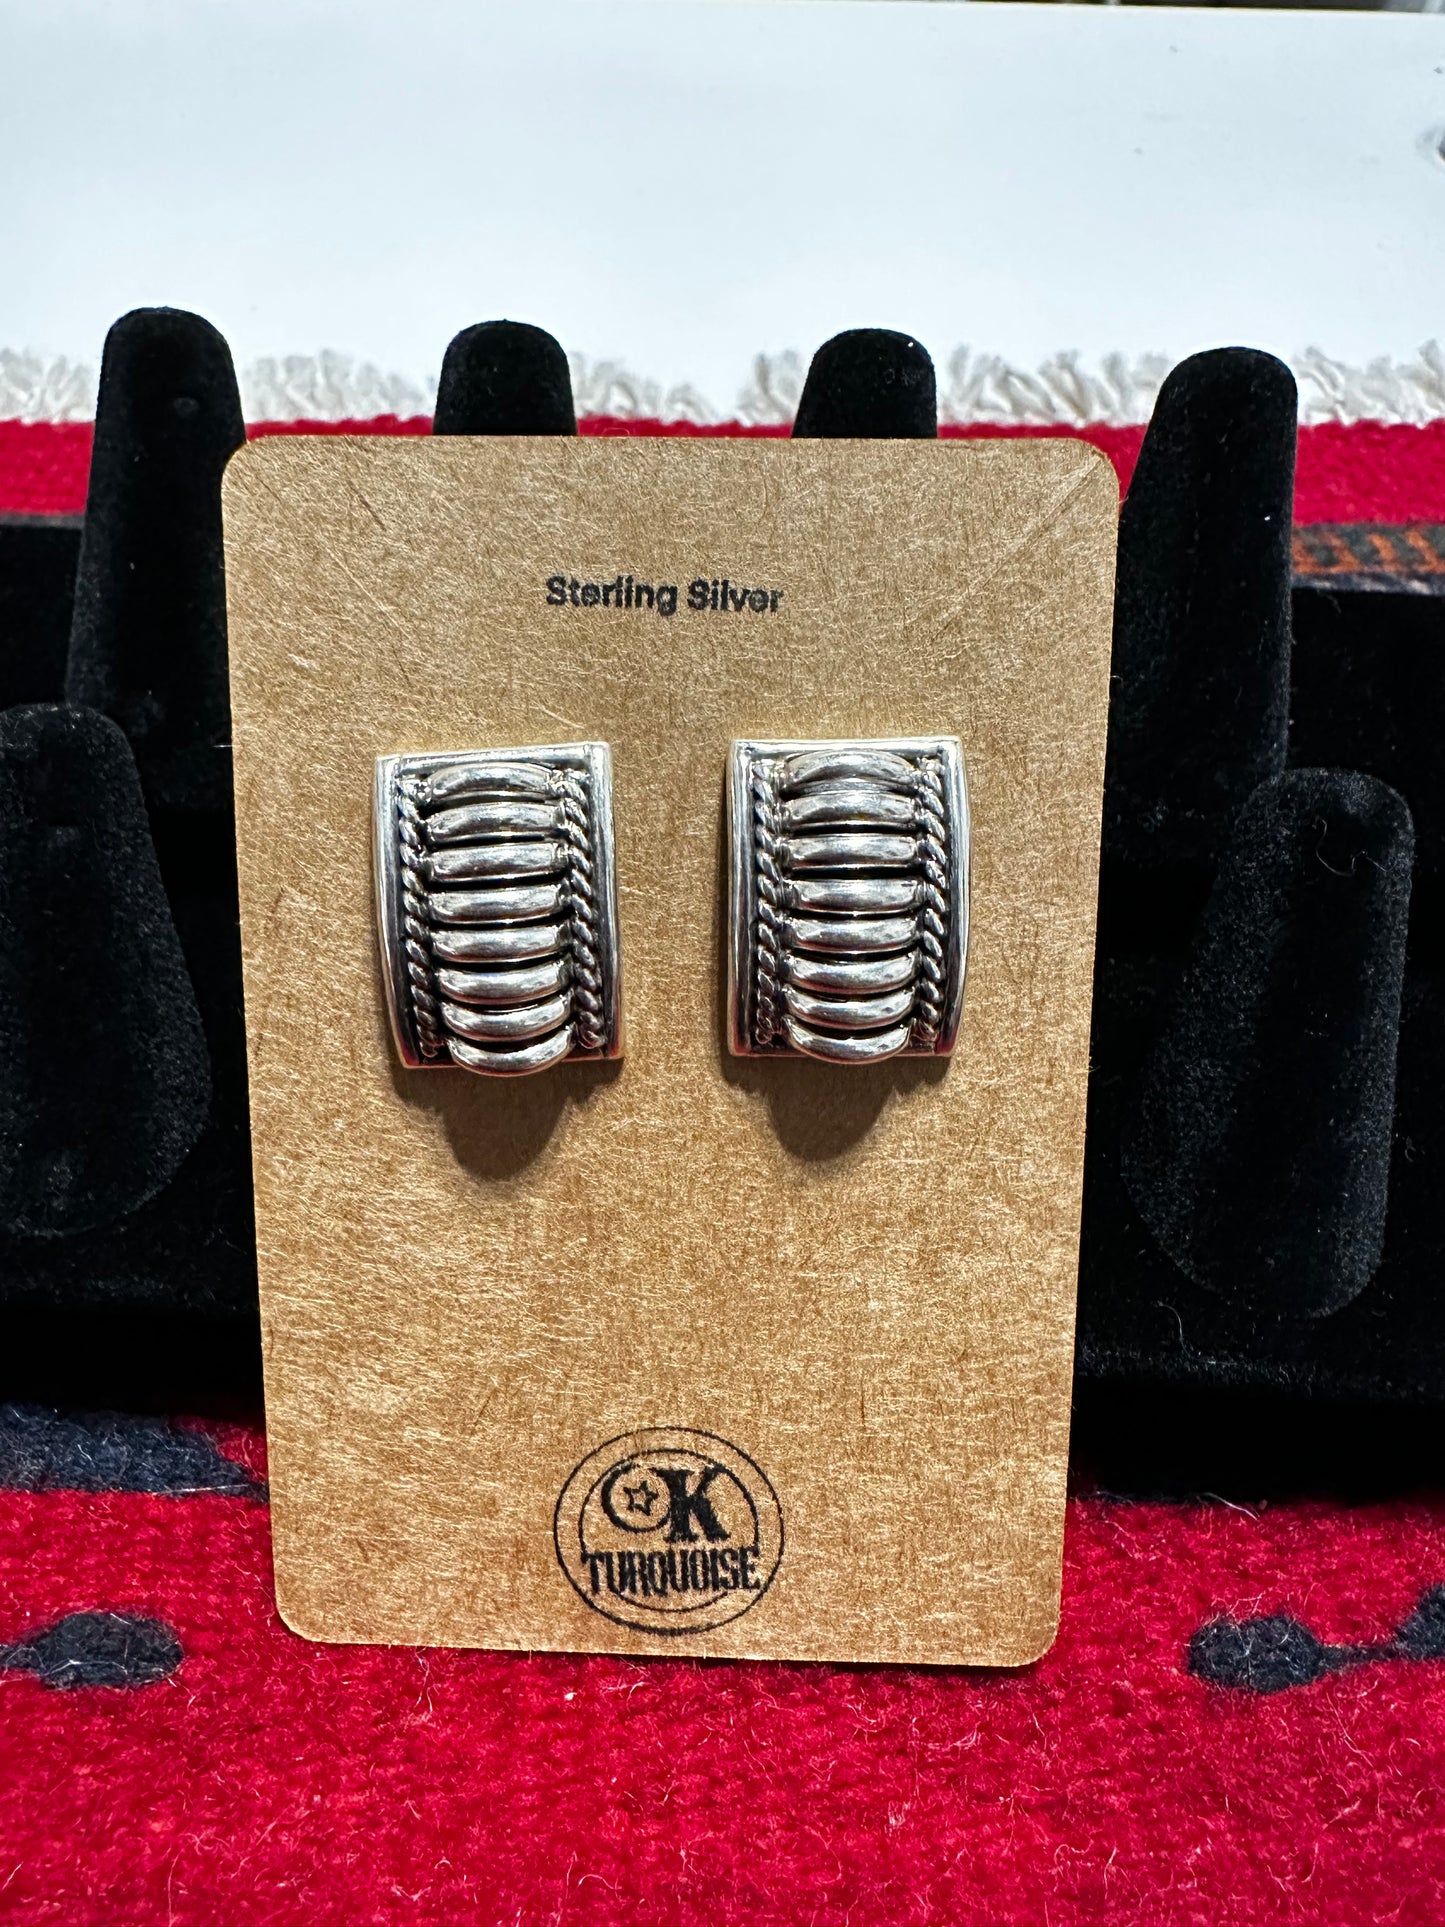 Sterling Silver 8-coil Post Earrings by Thomas Charley